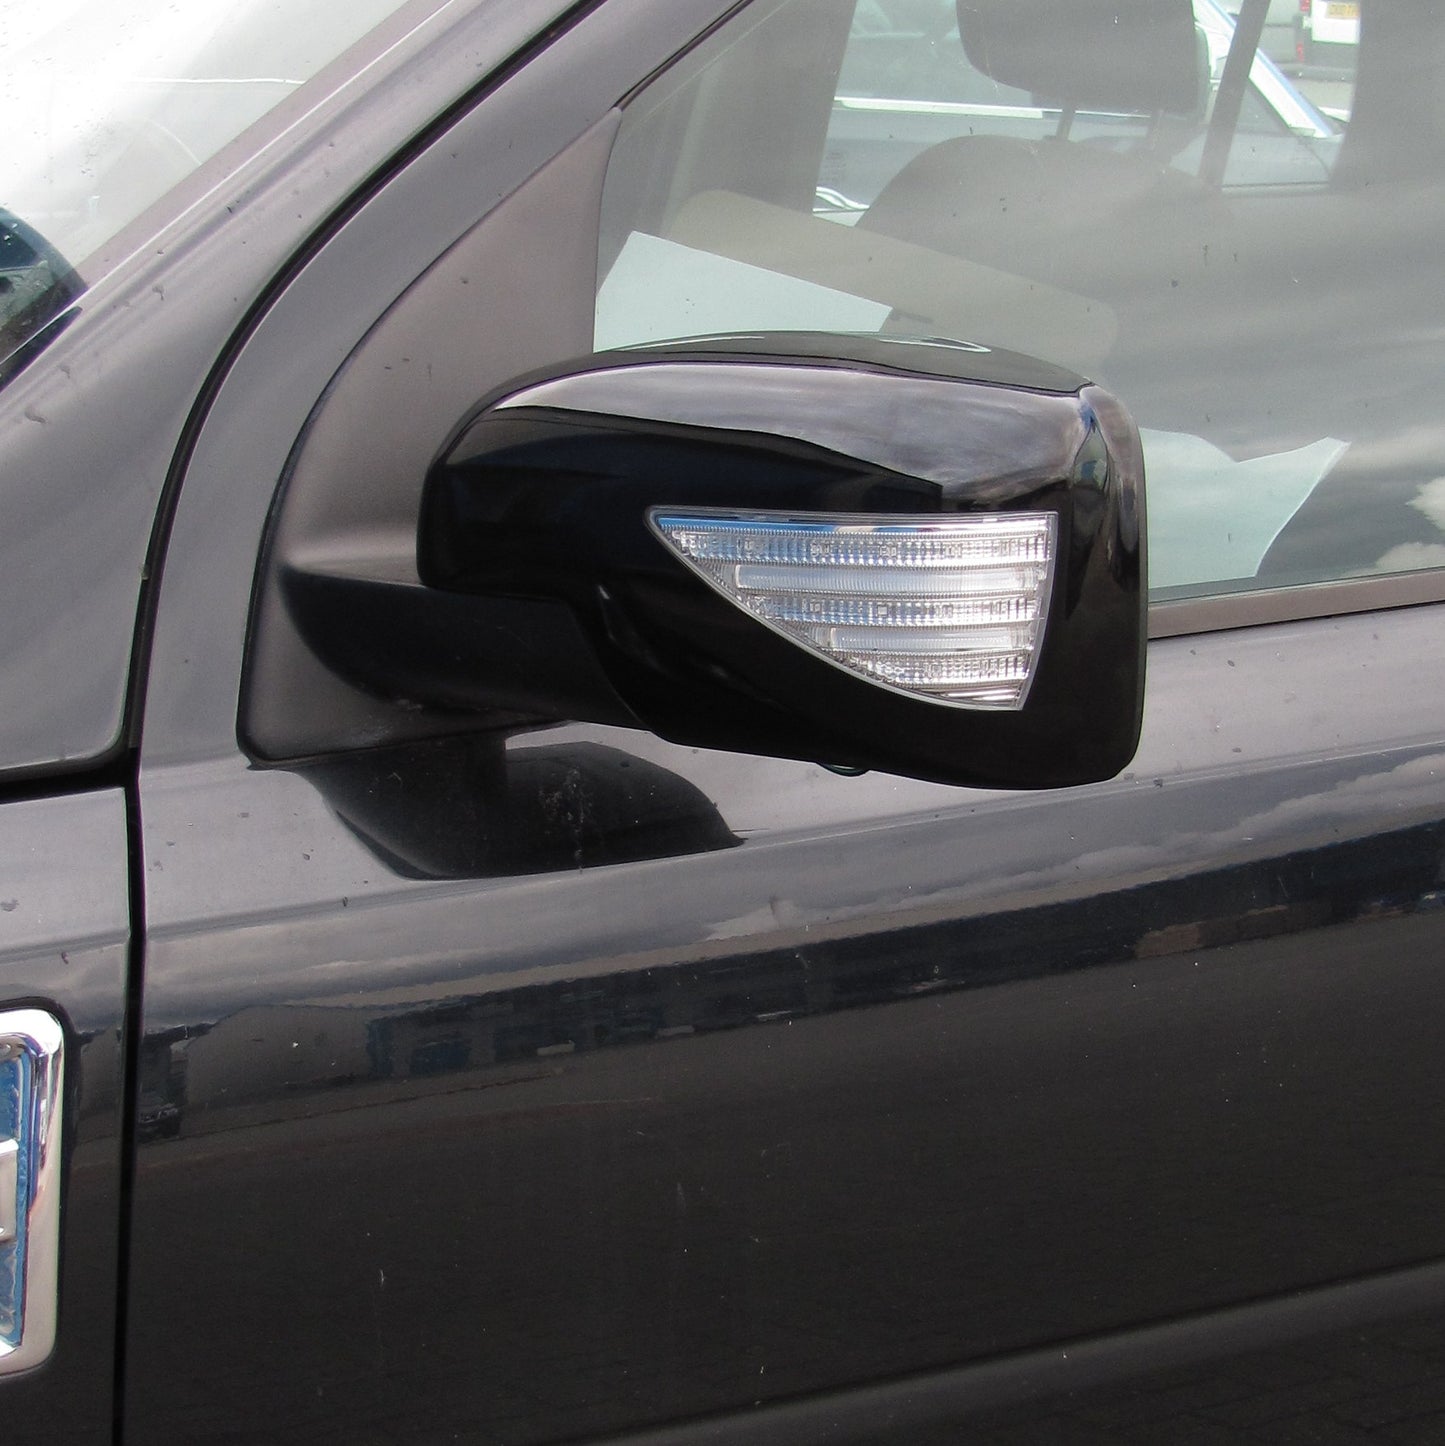 Full Mirror Covers With LED for Land Rover Freelander 2 (07-09 Mirrors) - Gloss Black